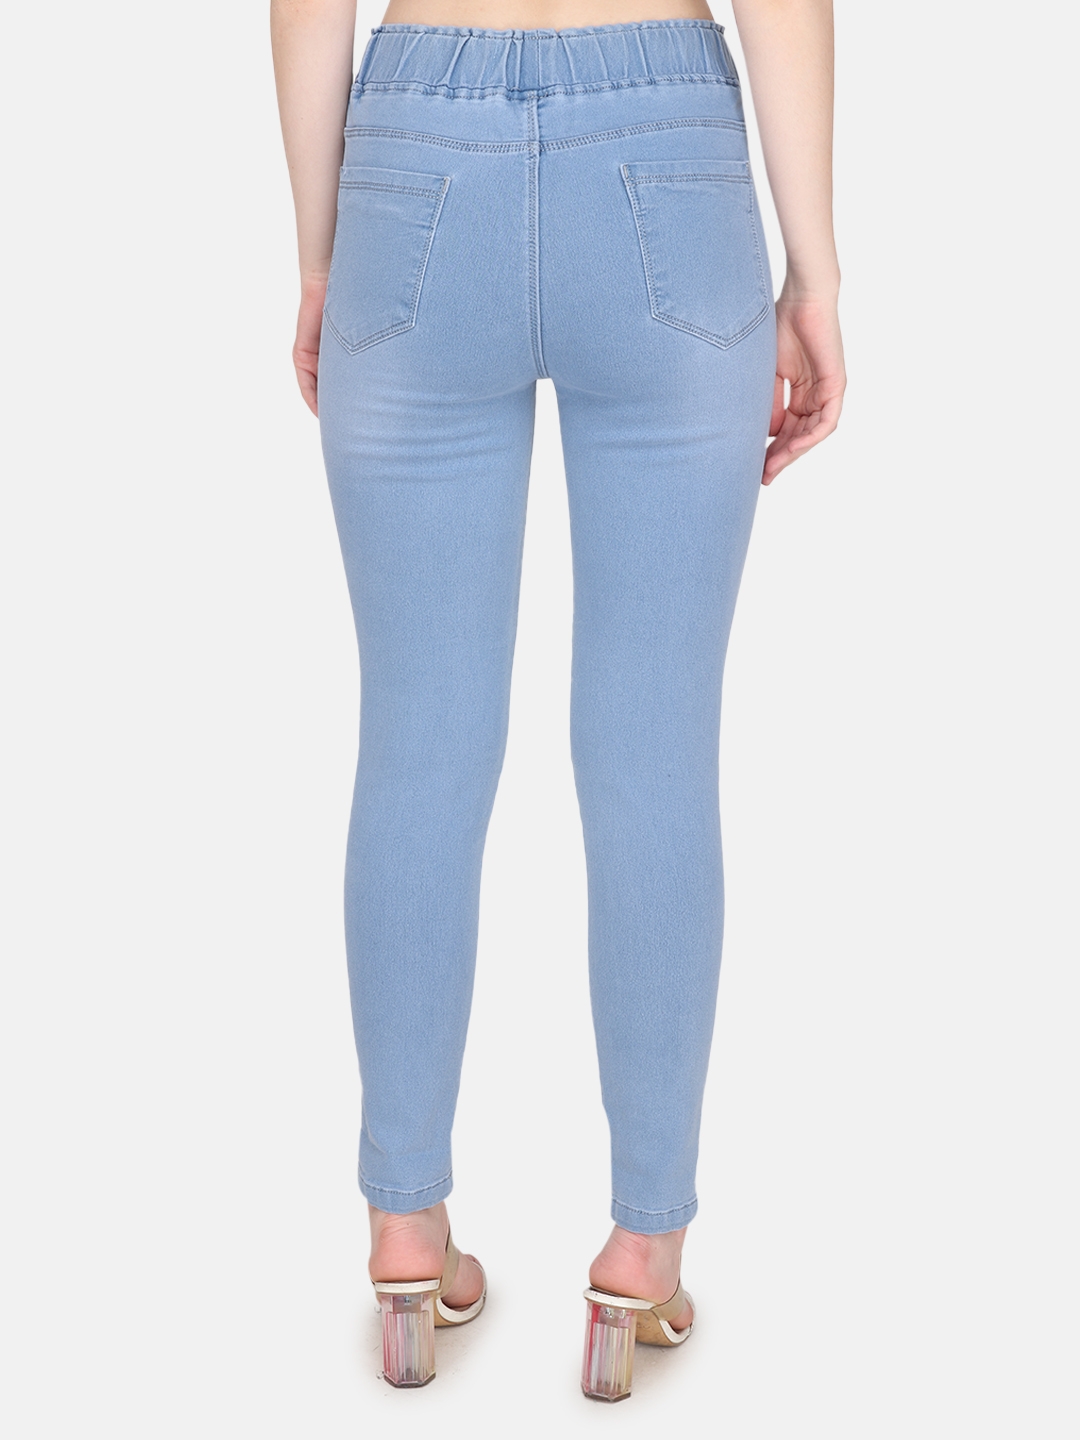 Albion | Albion By CnM Women Stretchable Light Blue Denim Jegging 3